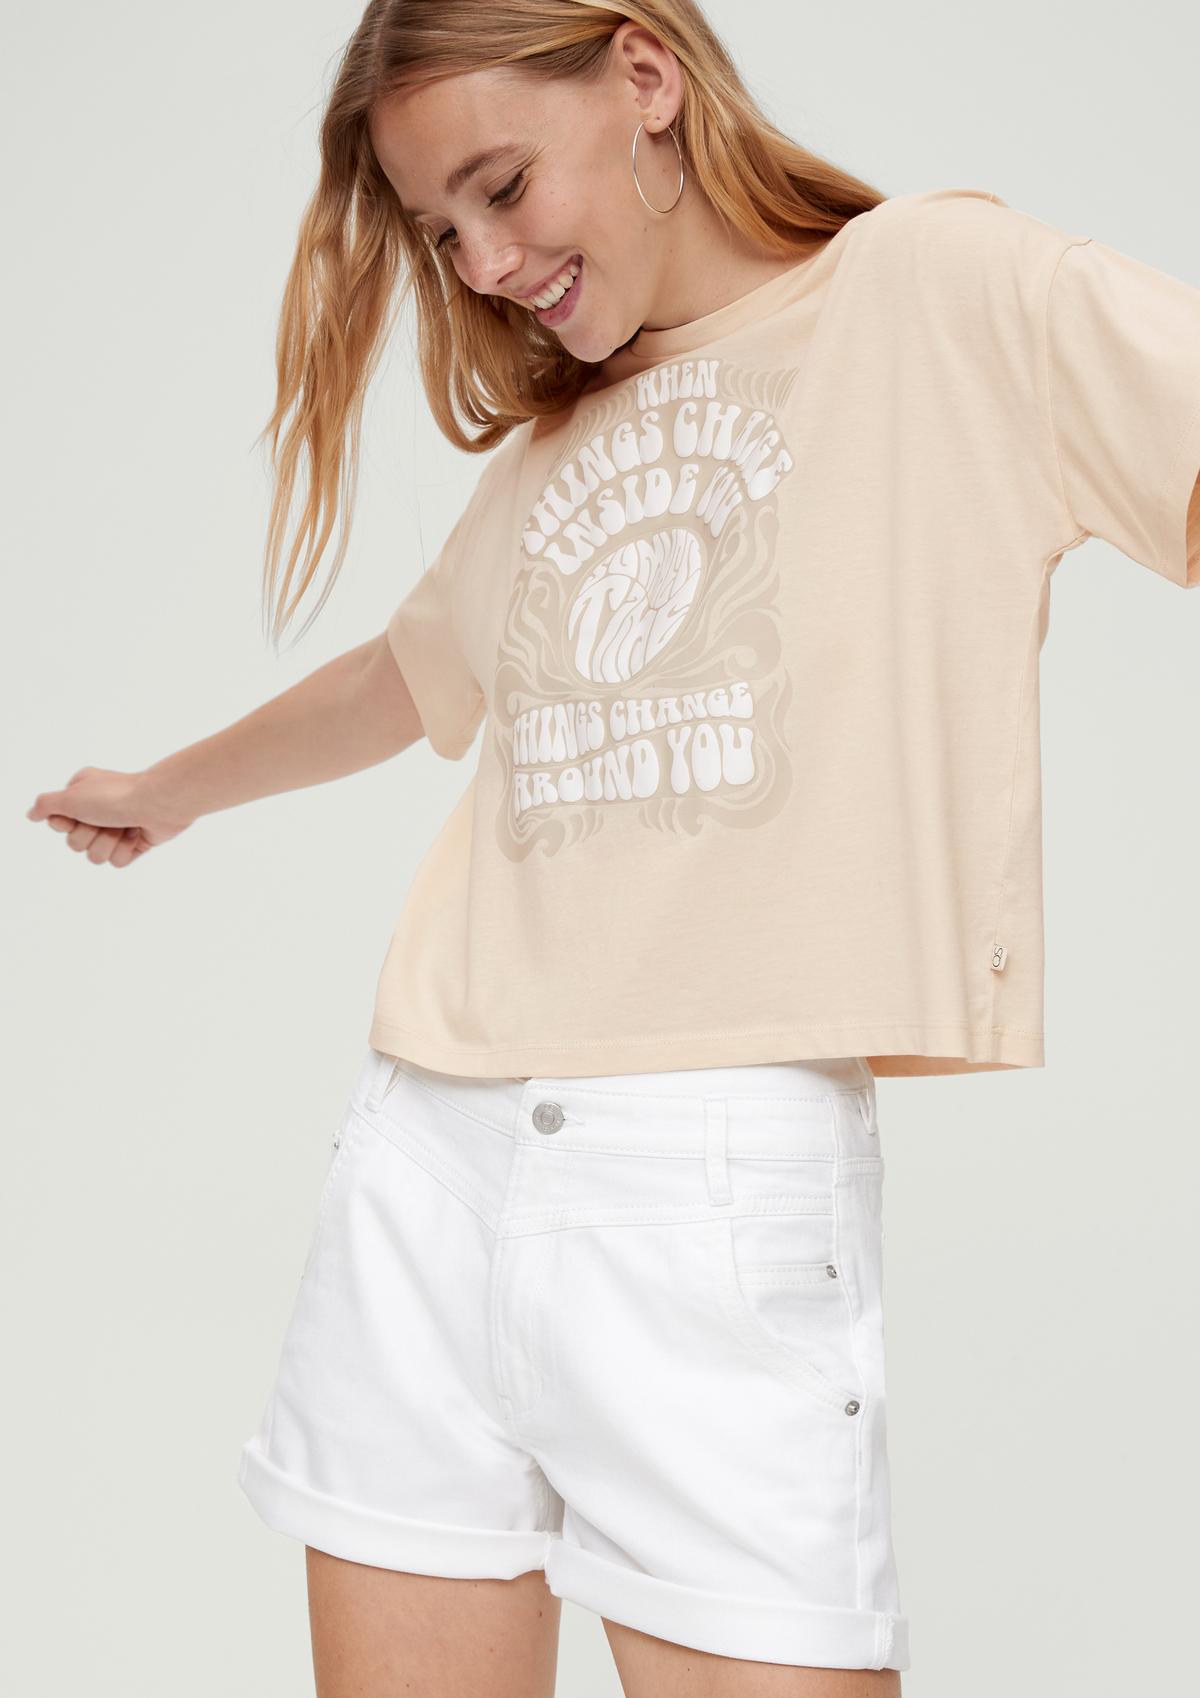 - a T-shirt front with beige light Cotton print